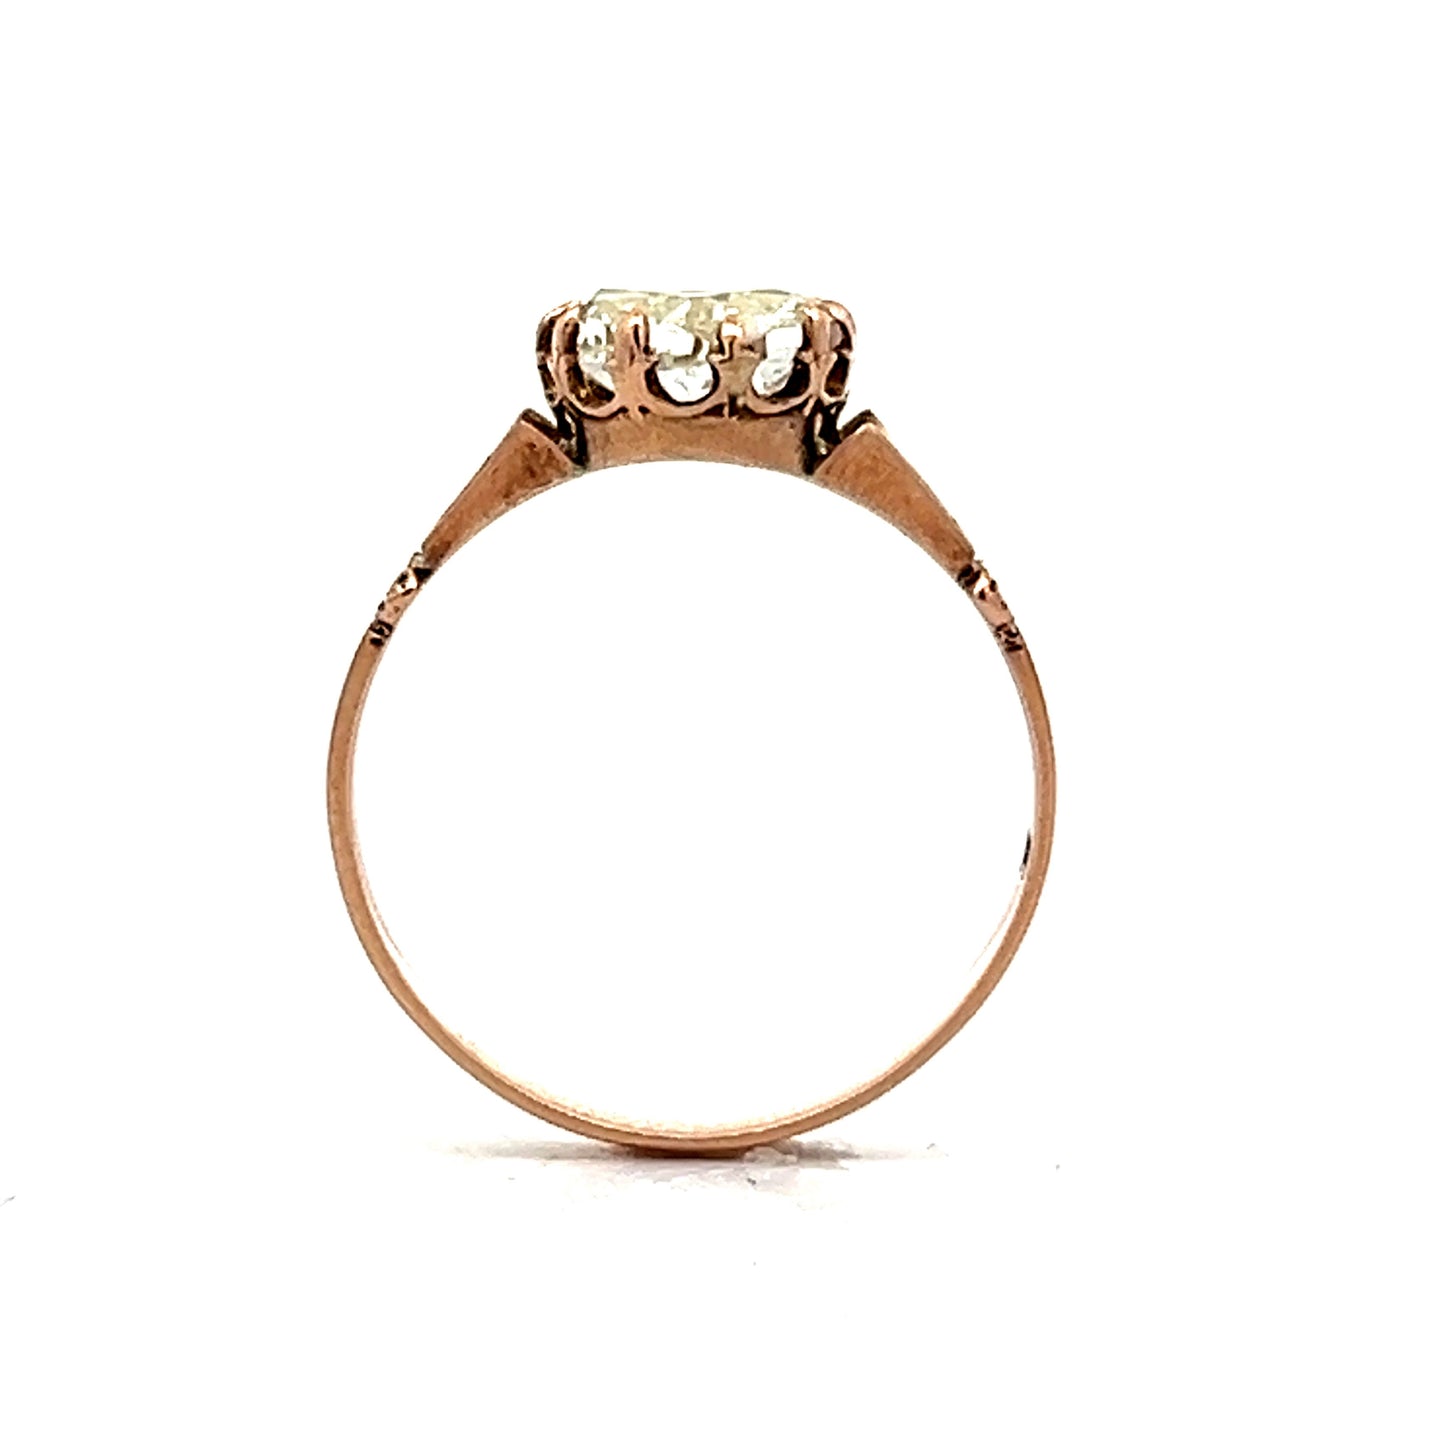 1.97 Victorian Rose Cut Diamond Engagement Ring in Rose Gold